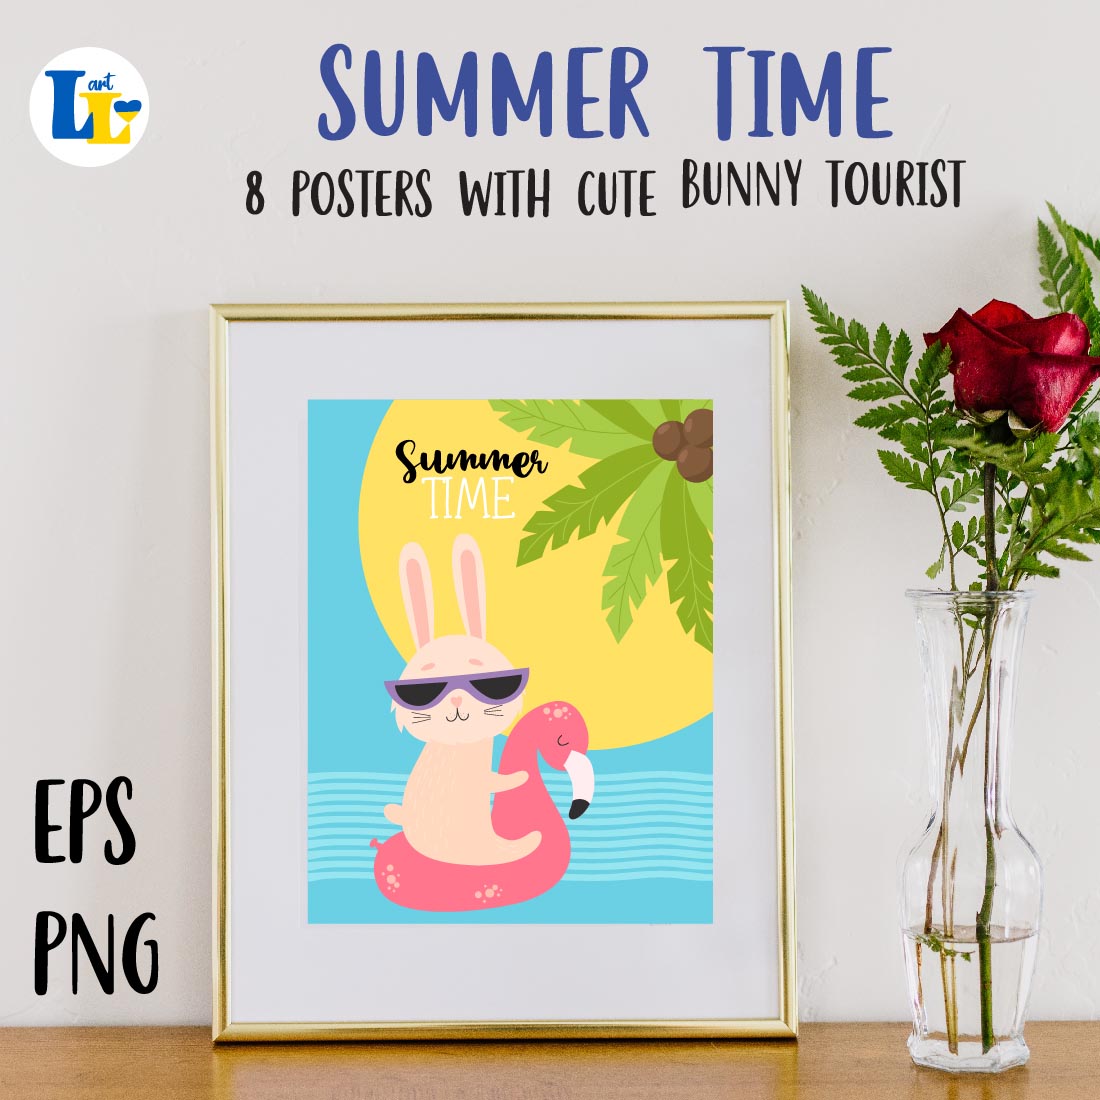 Cute Beach Bunny Tourist Summer Time Posters.